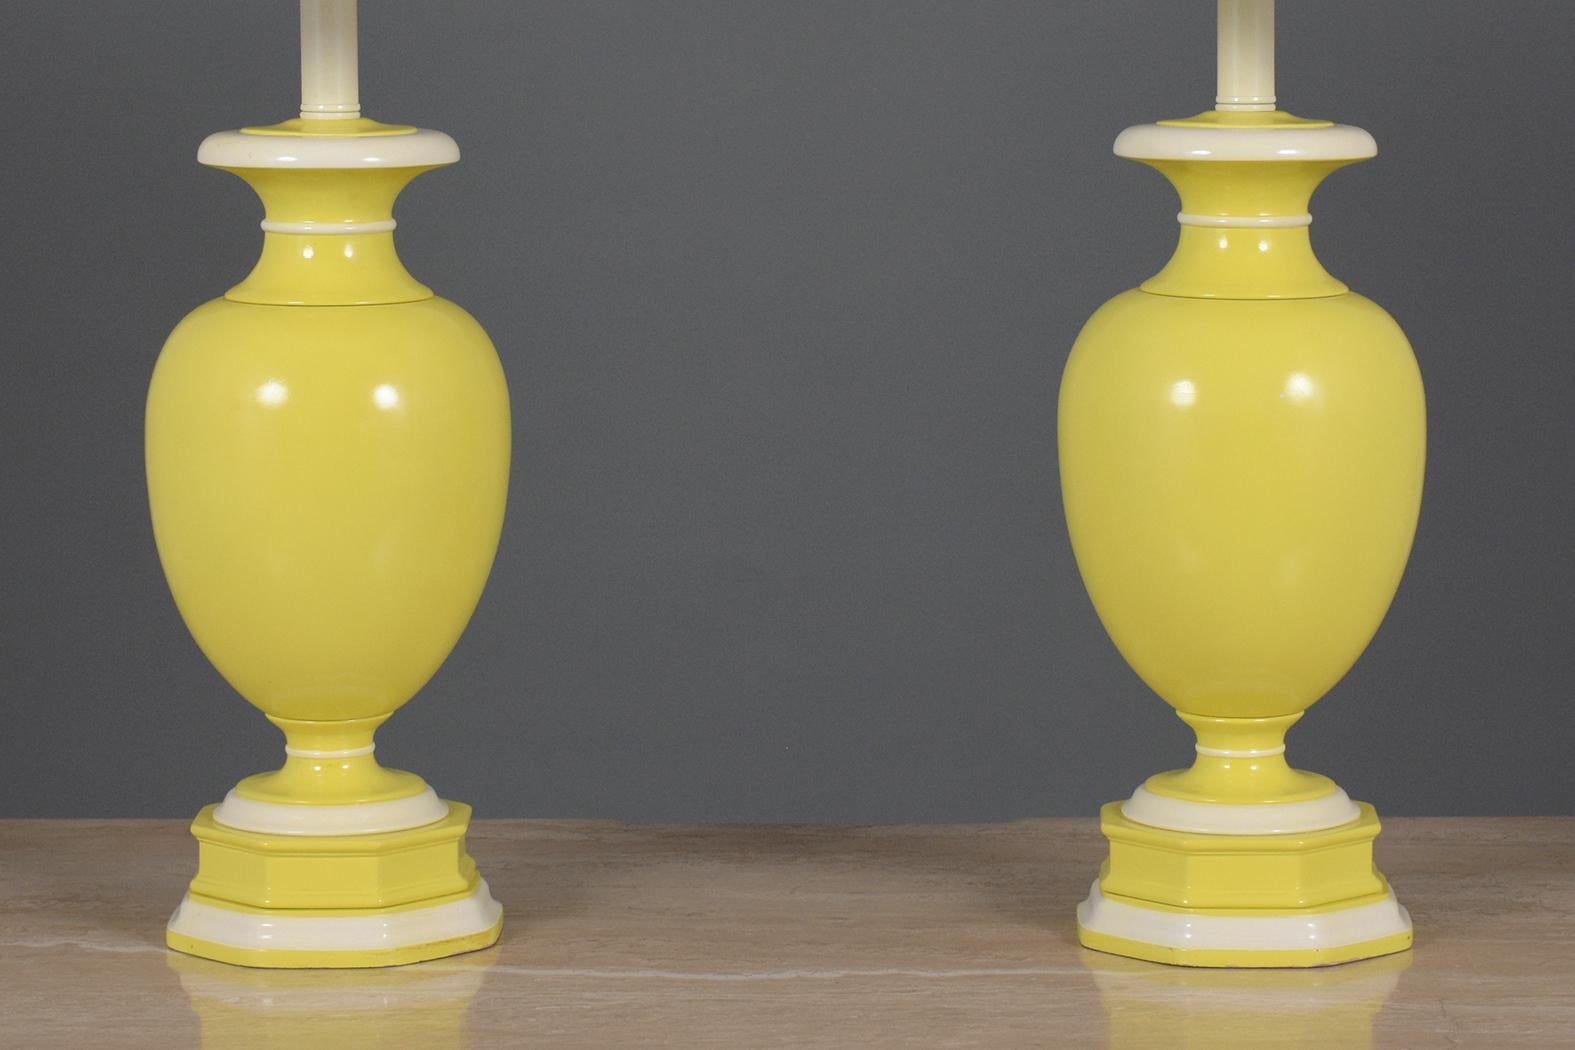 Polished Neoclassical Yellow & White Ceramic Table Lamps with New White Shades